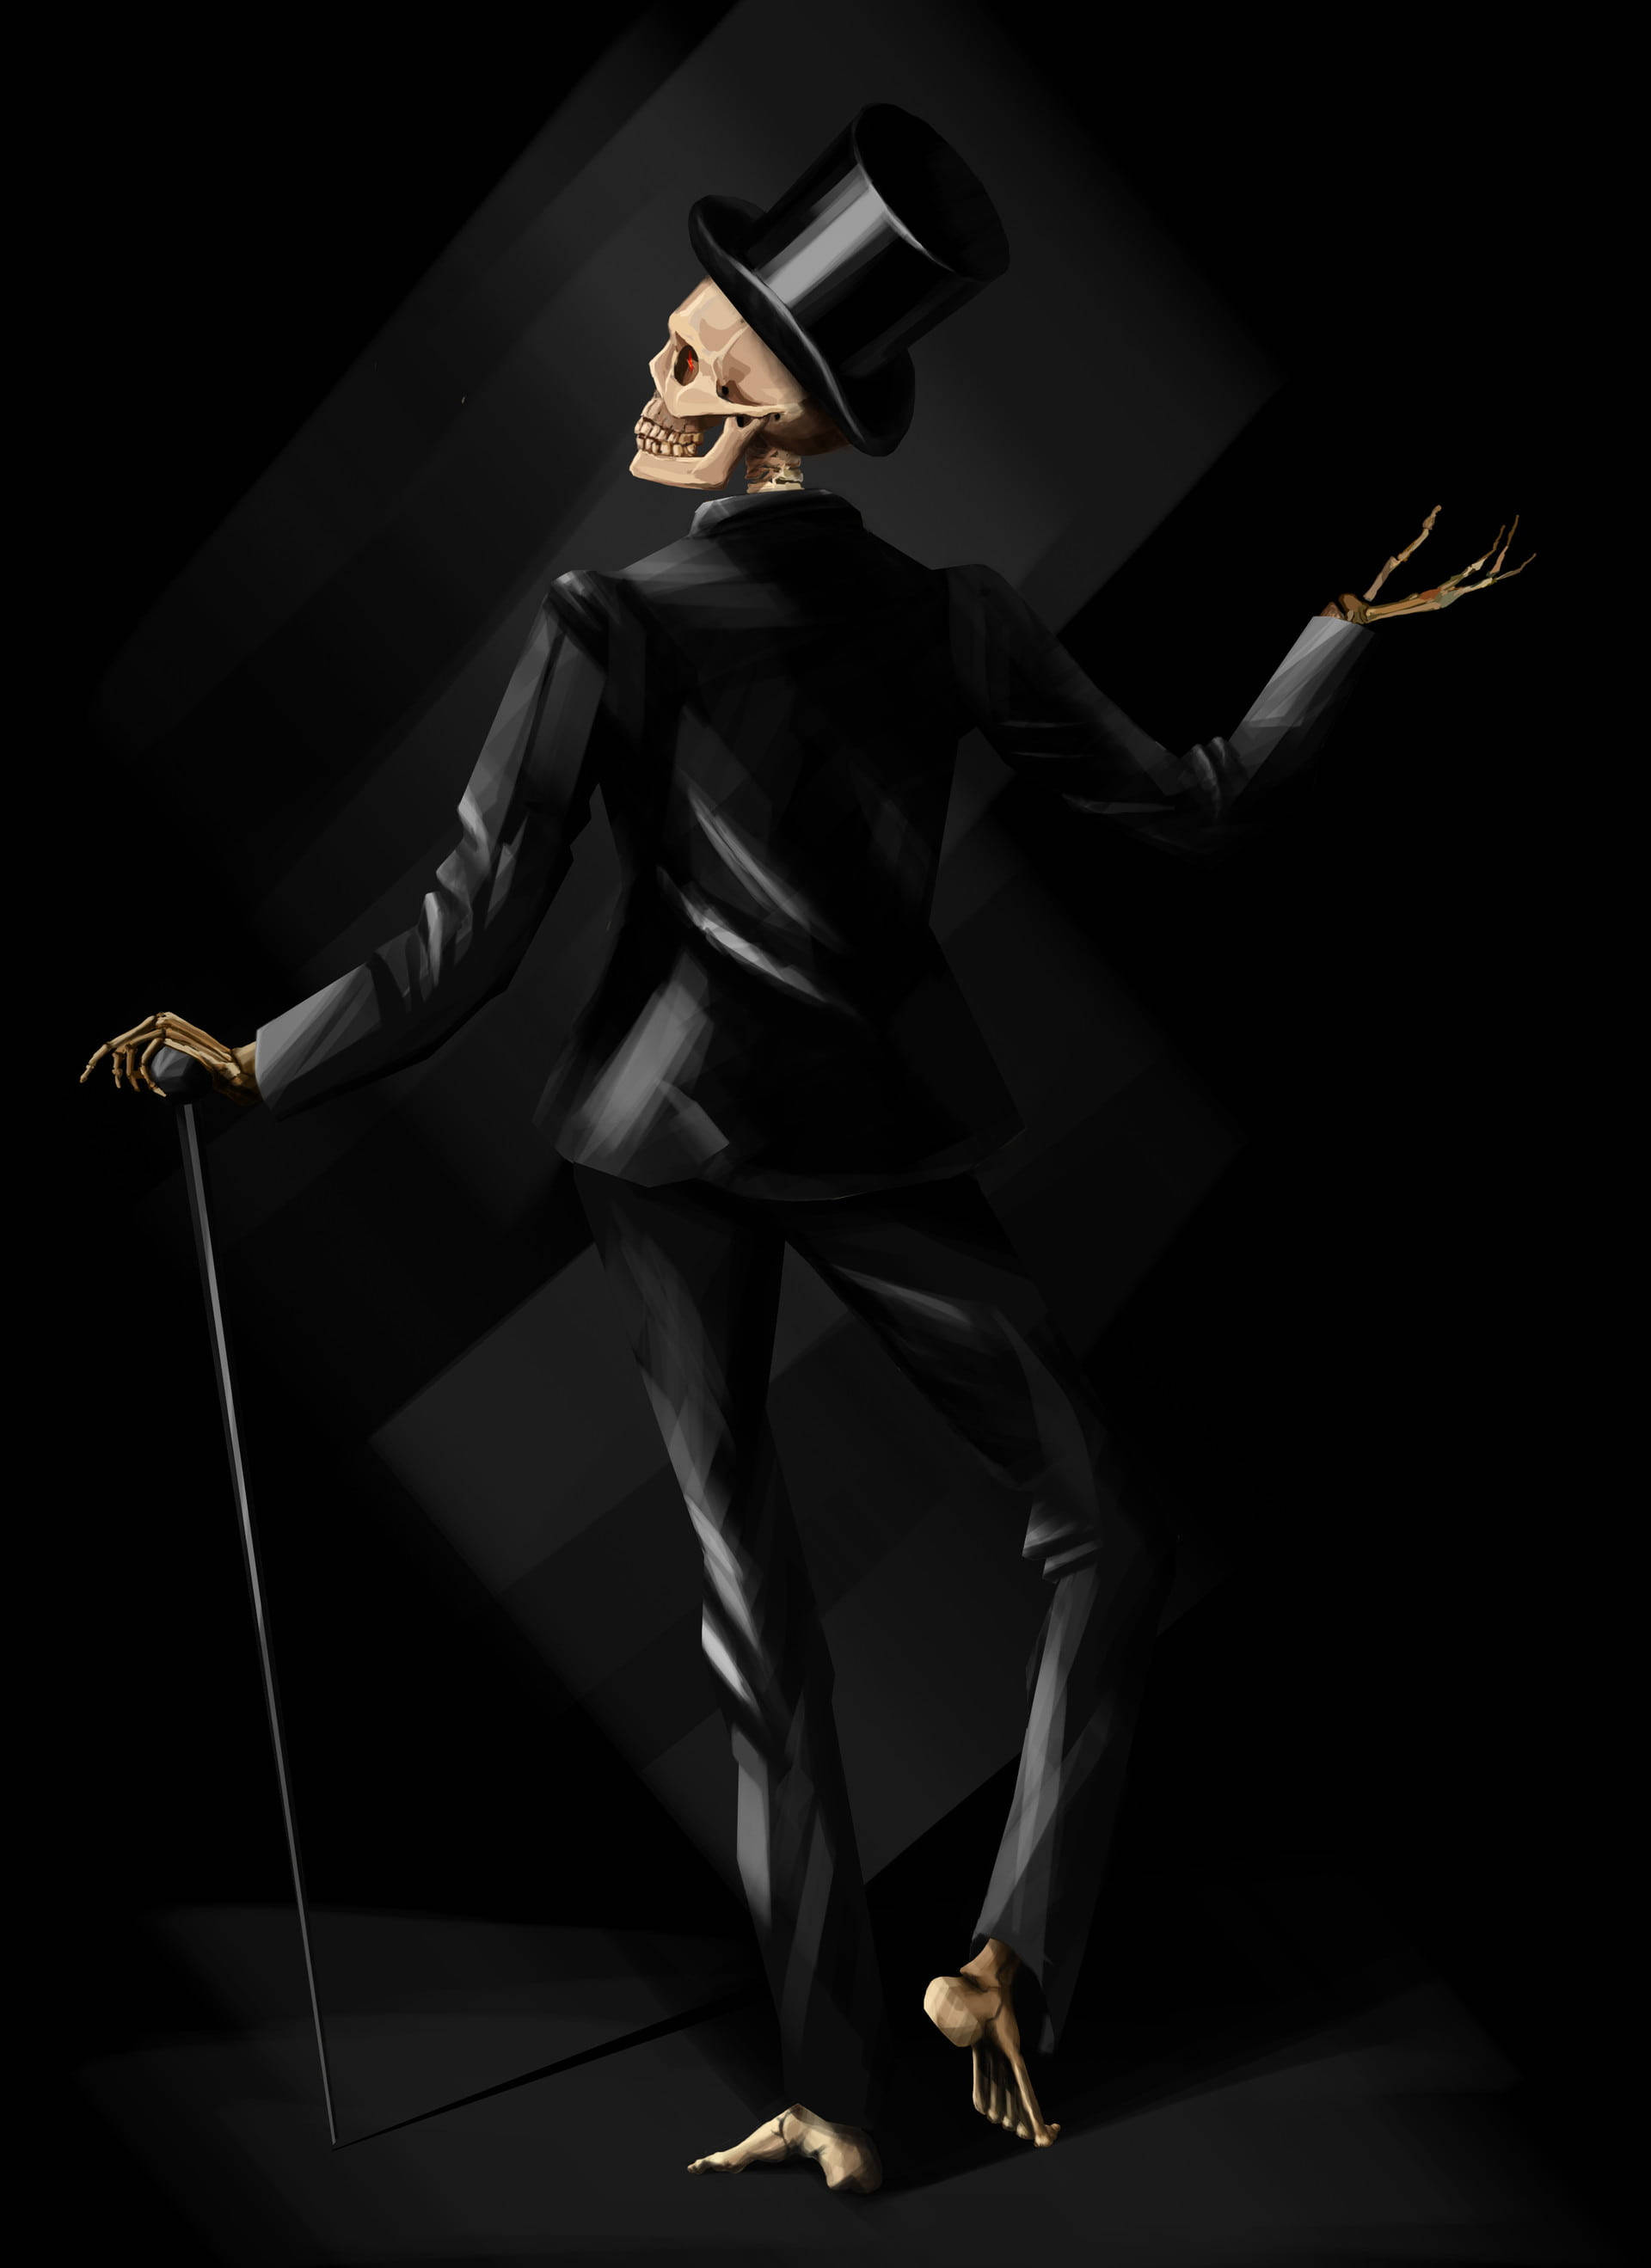 Dark Aesthetic: A black magician suit on a skeleton, reflecting a mysterious and intriguing vibe. Wallpaper